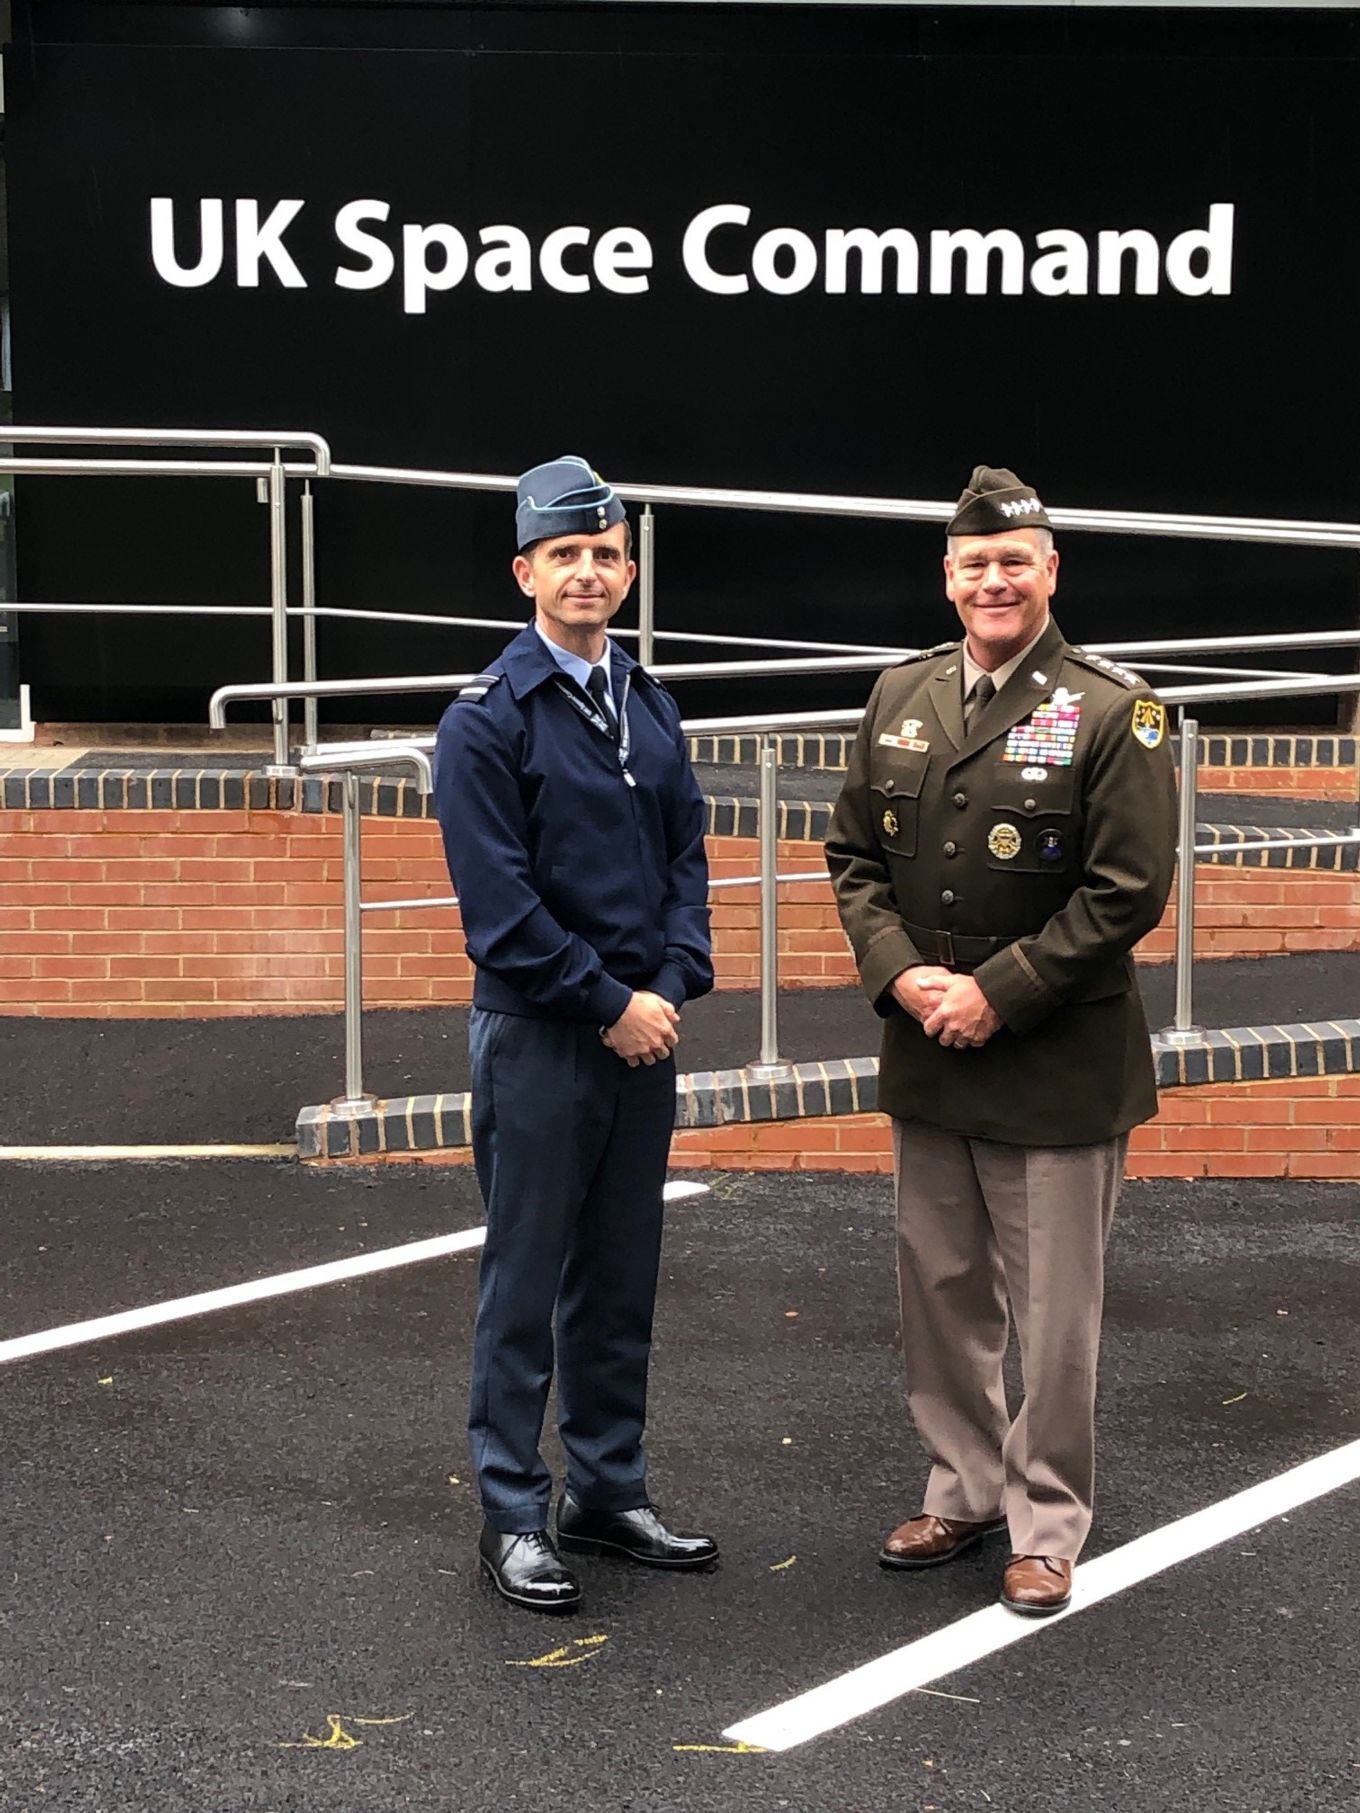 General James H. Dickinson and Air Vice-Marshall Paul Godfrey stand outside the headquarters of UK Space Command.